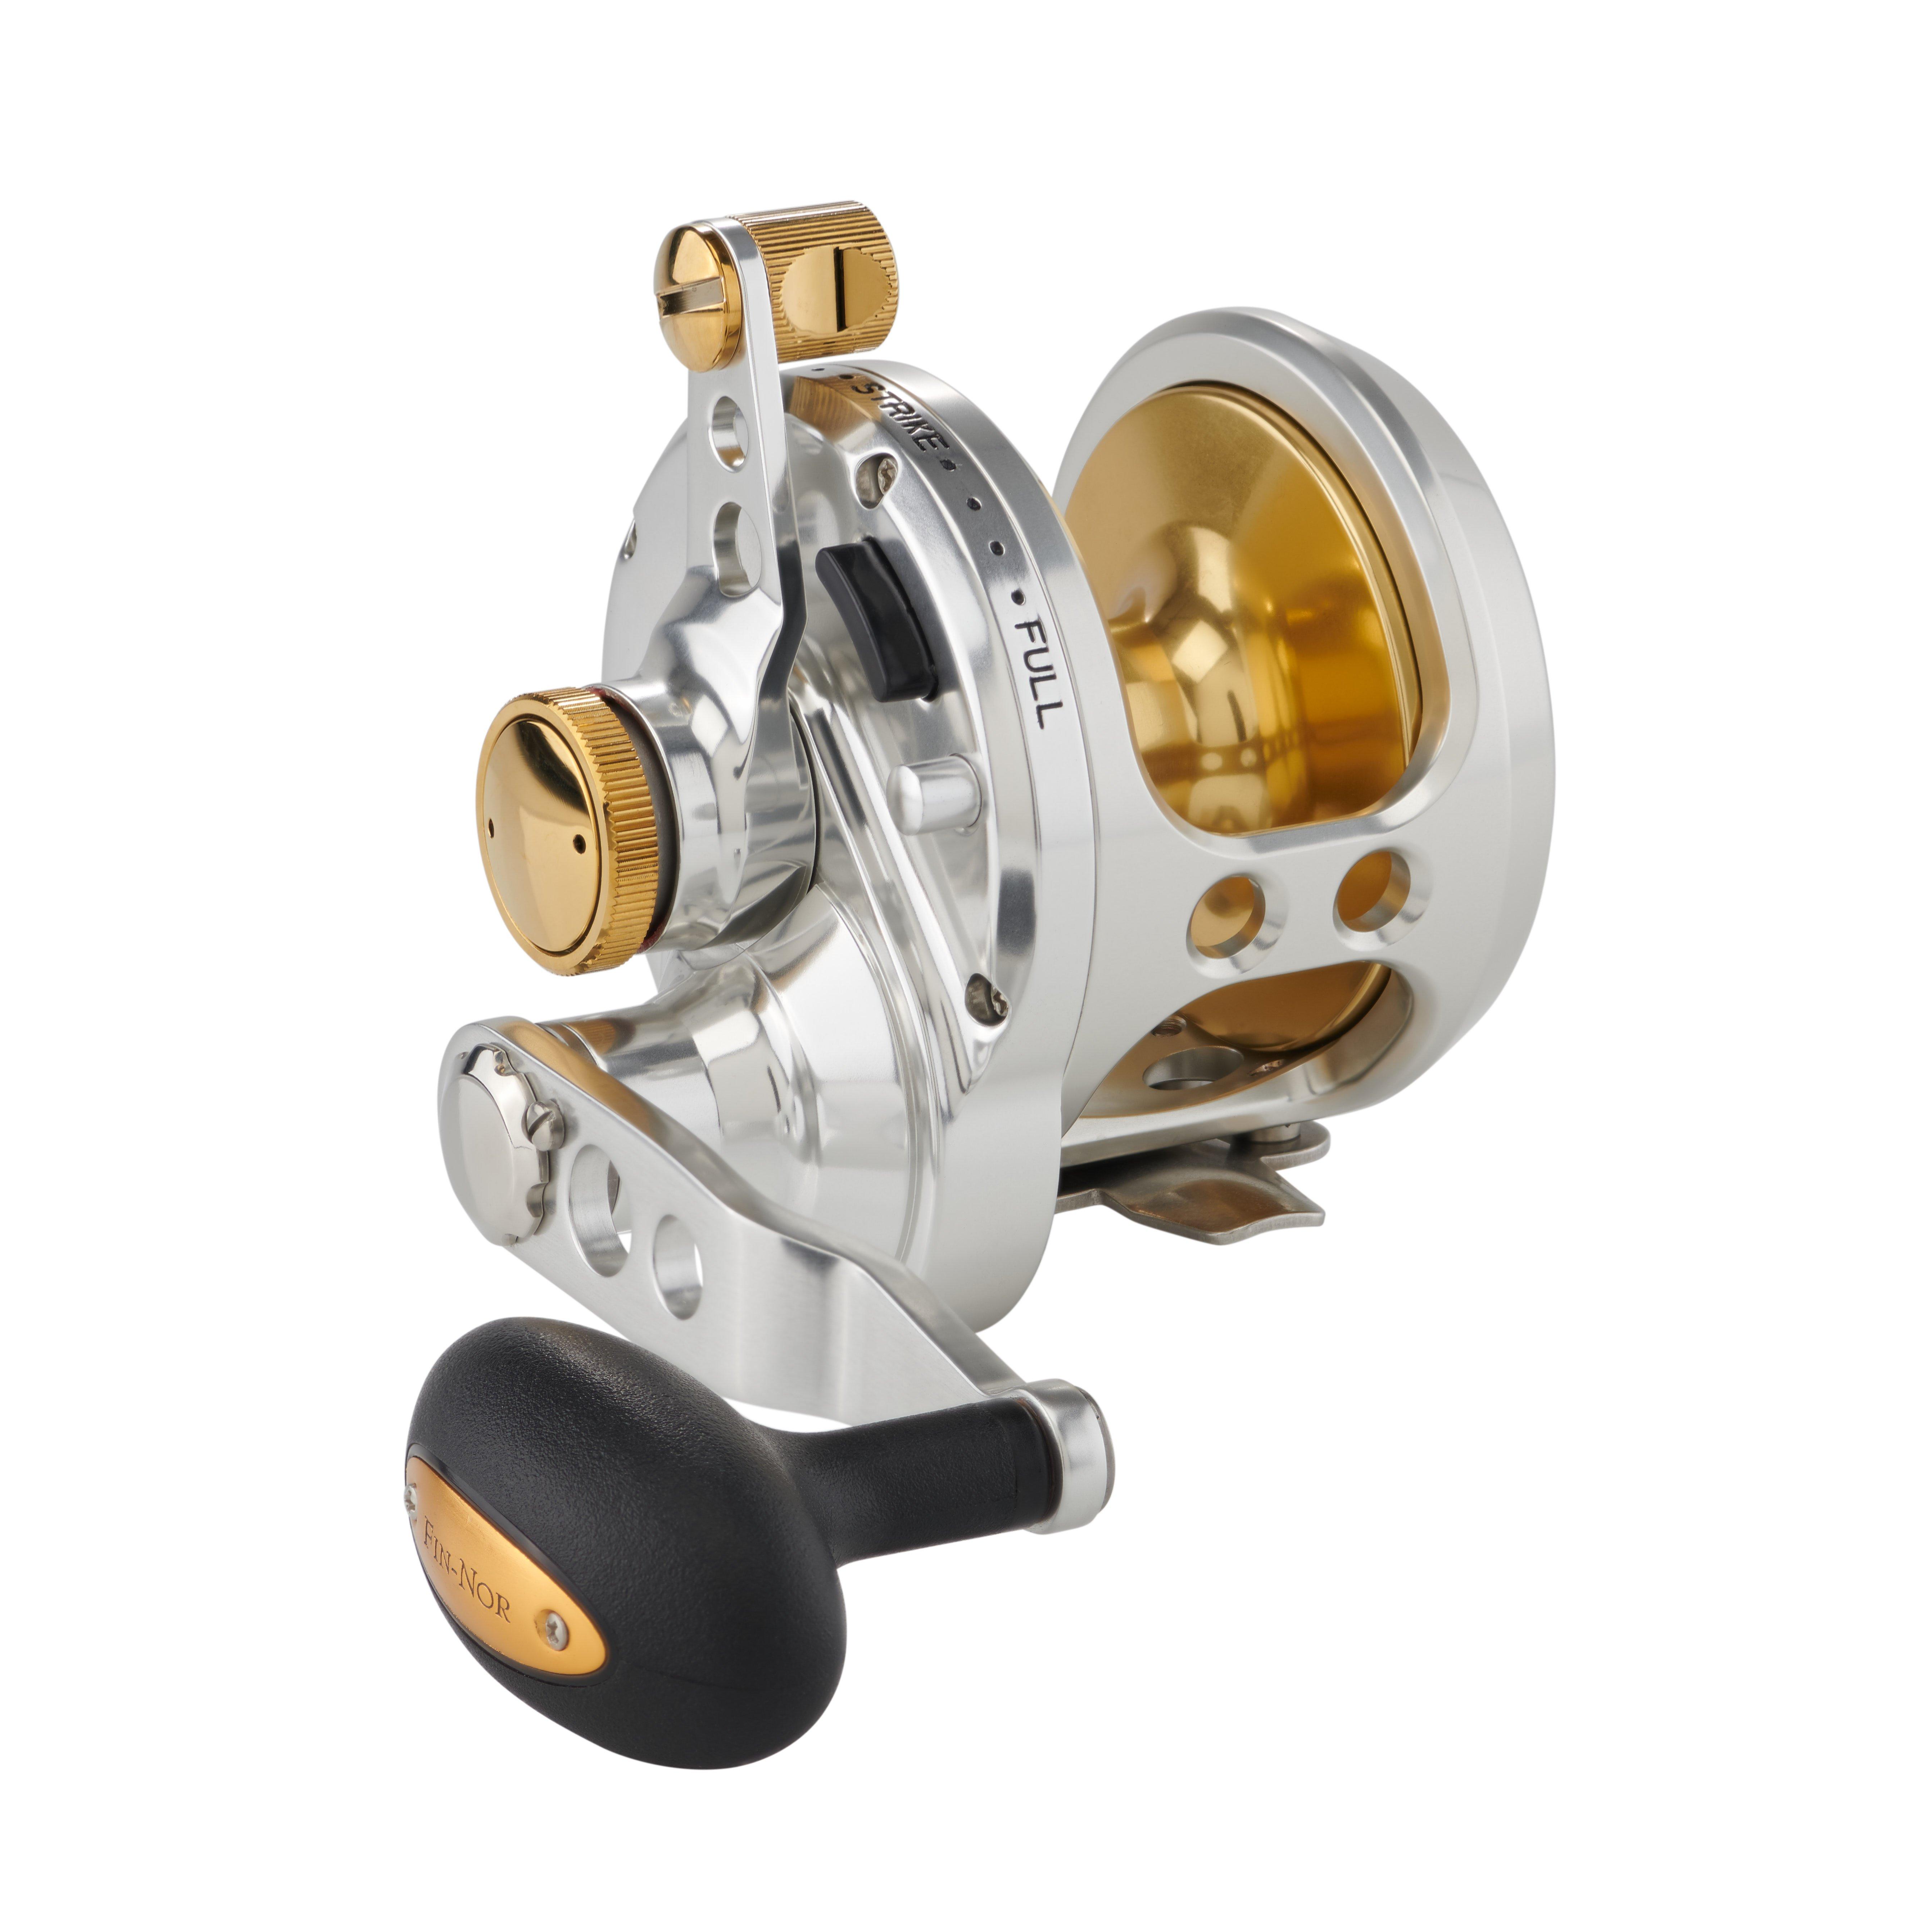 Fin Nor Marquesa 20 Lever Drag Convnetional Reel 